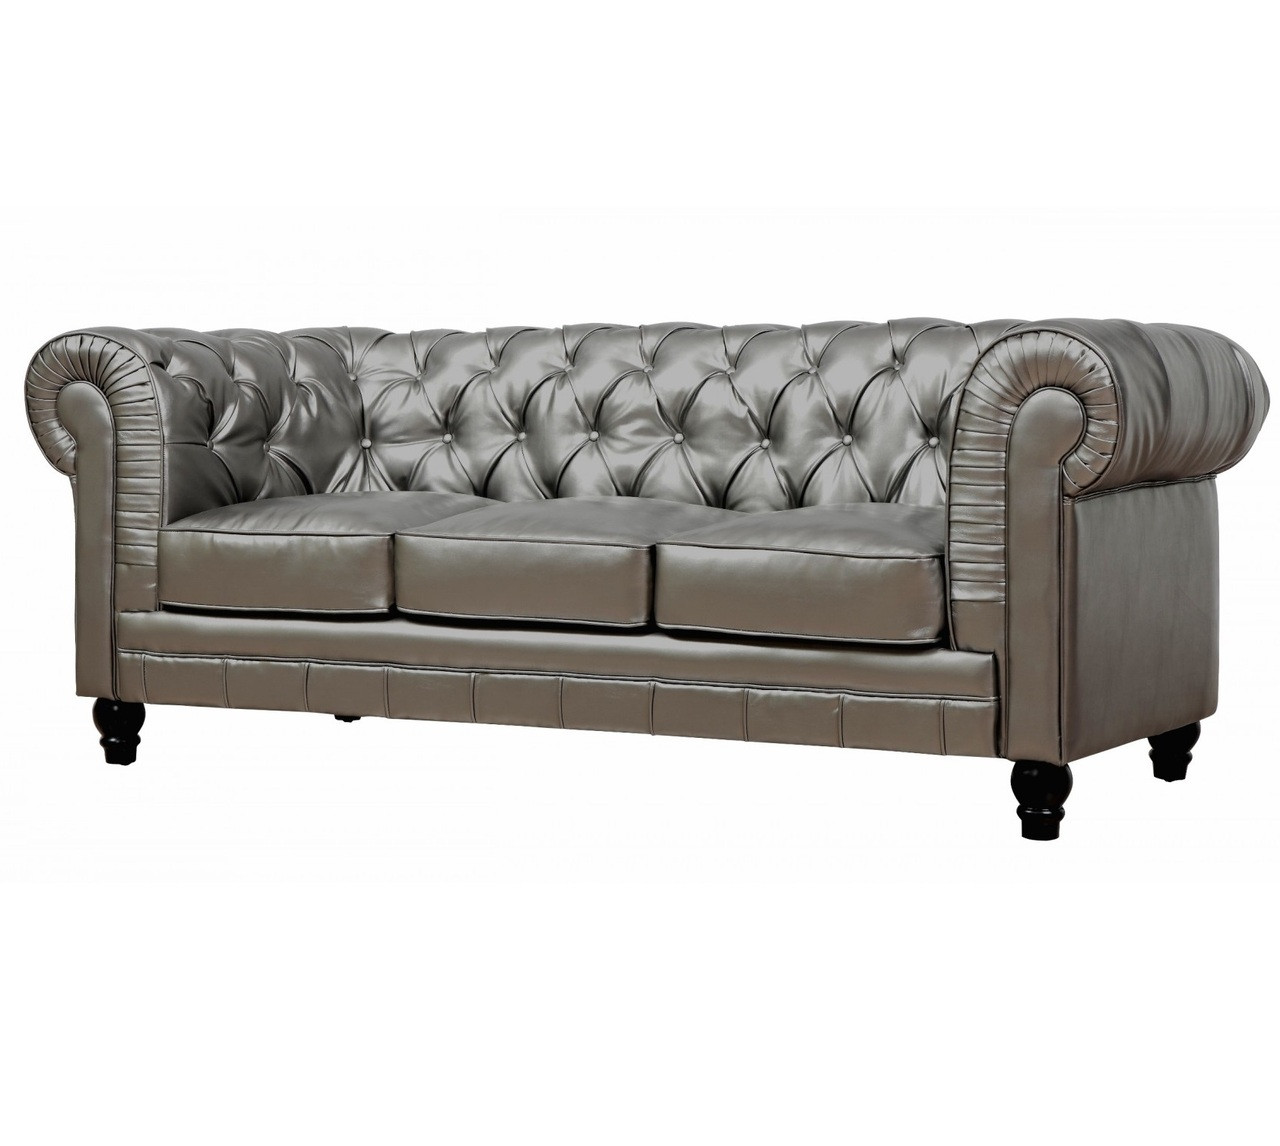 Zahara Tufted Silver Leather Chesterfield Sofa Zin Home